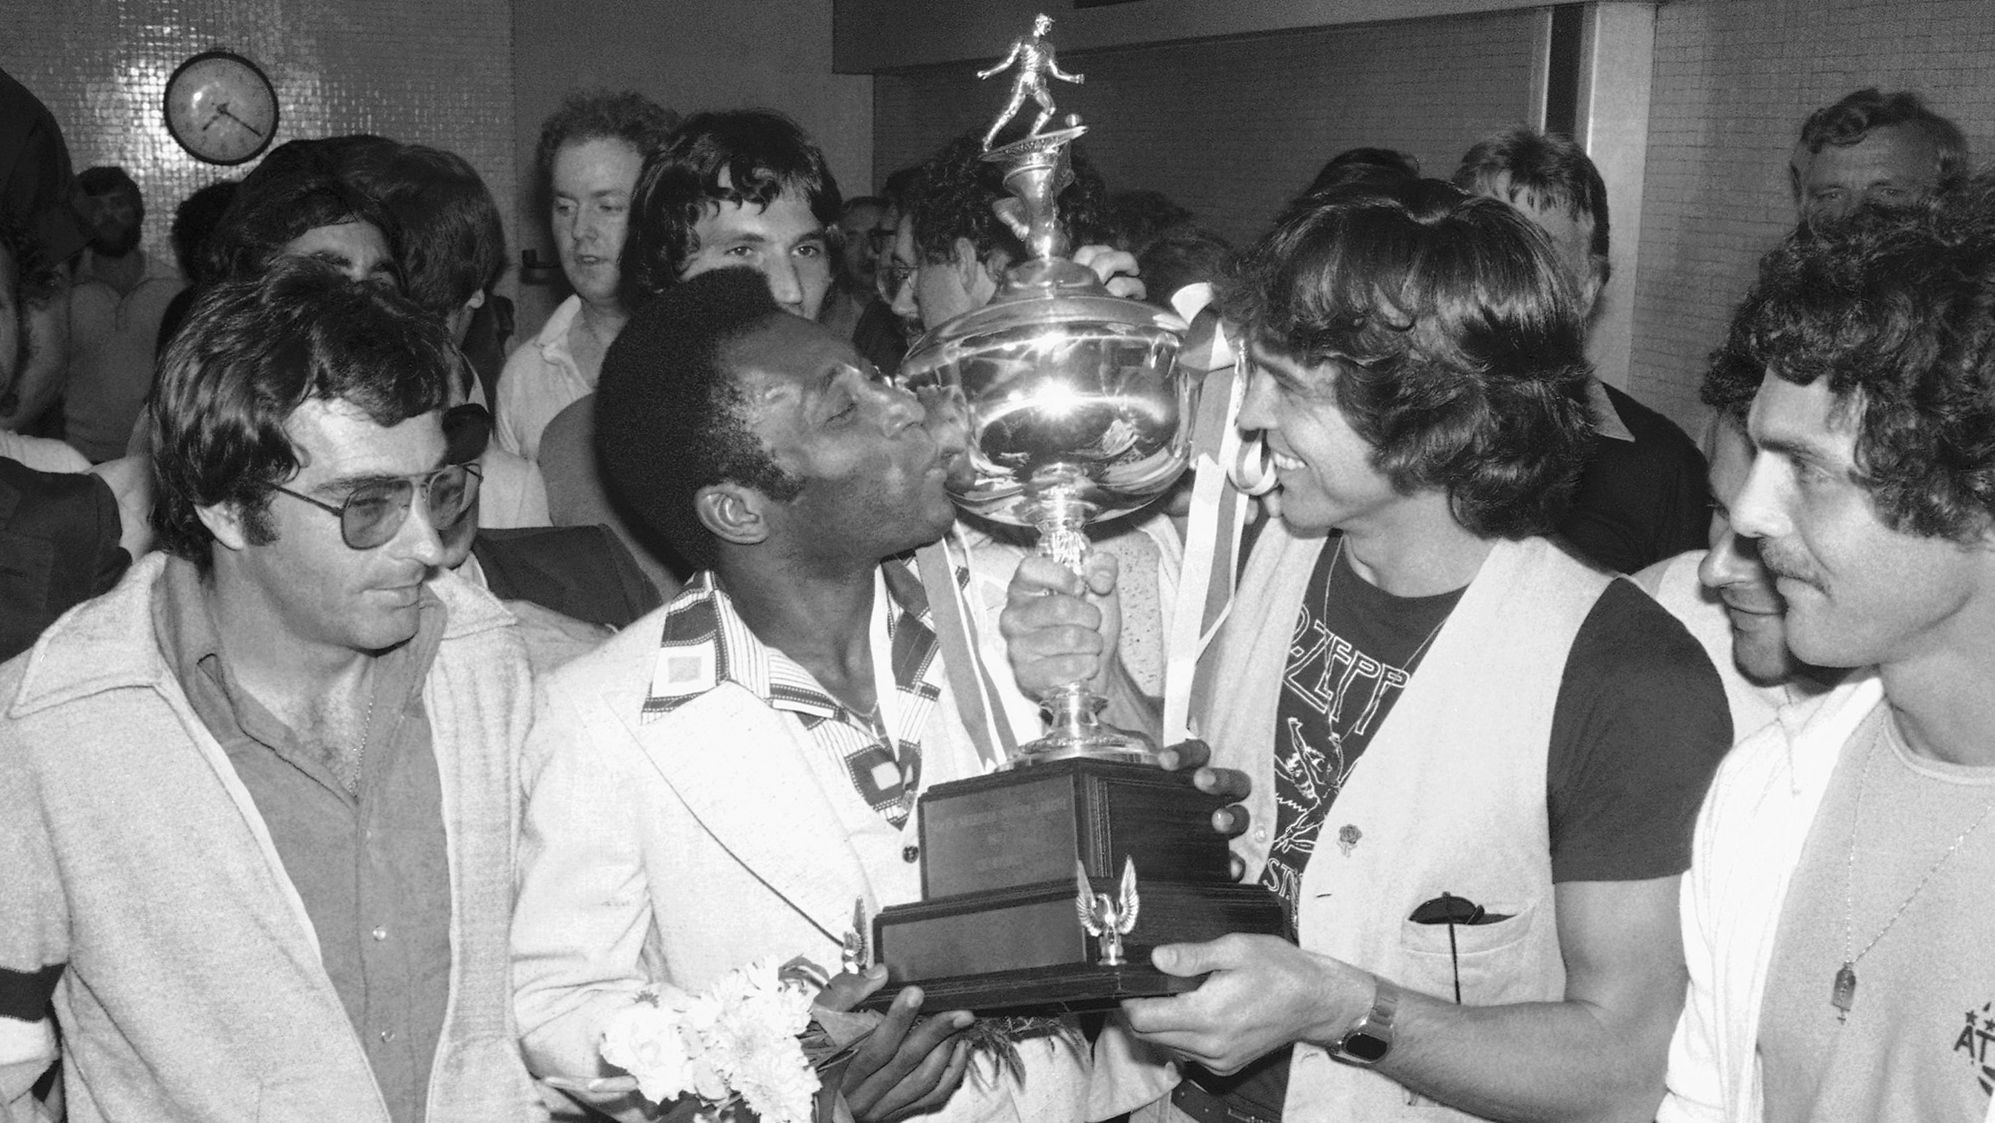 Pelé lifts the NACL trophy after winning the title in his last season in the US. 